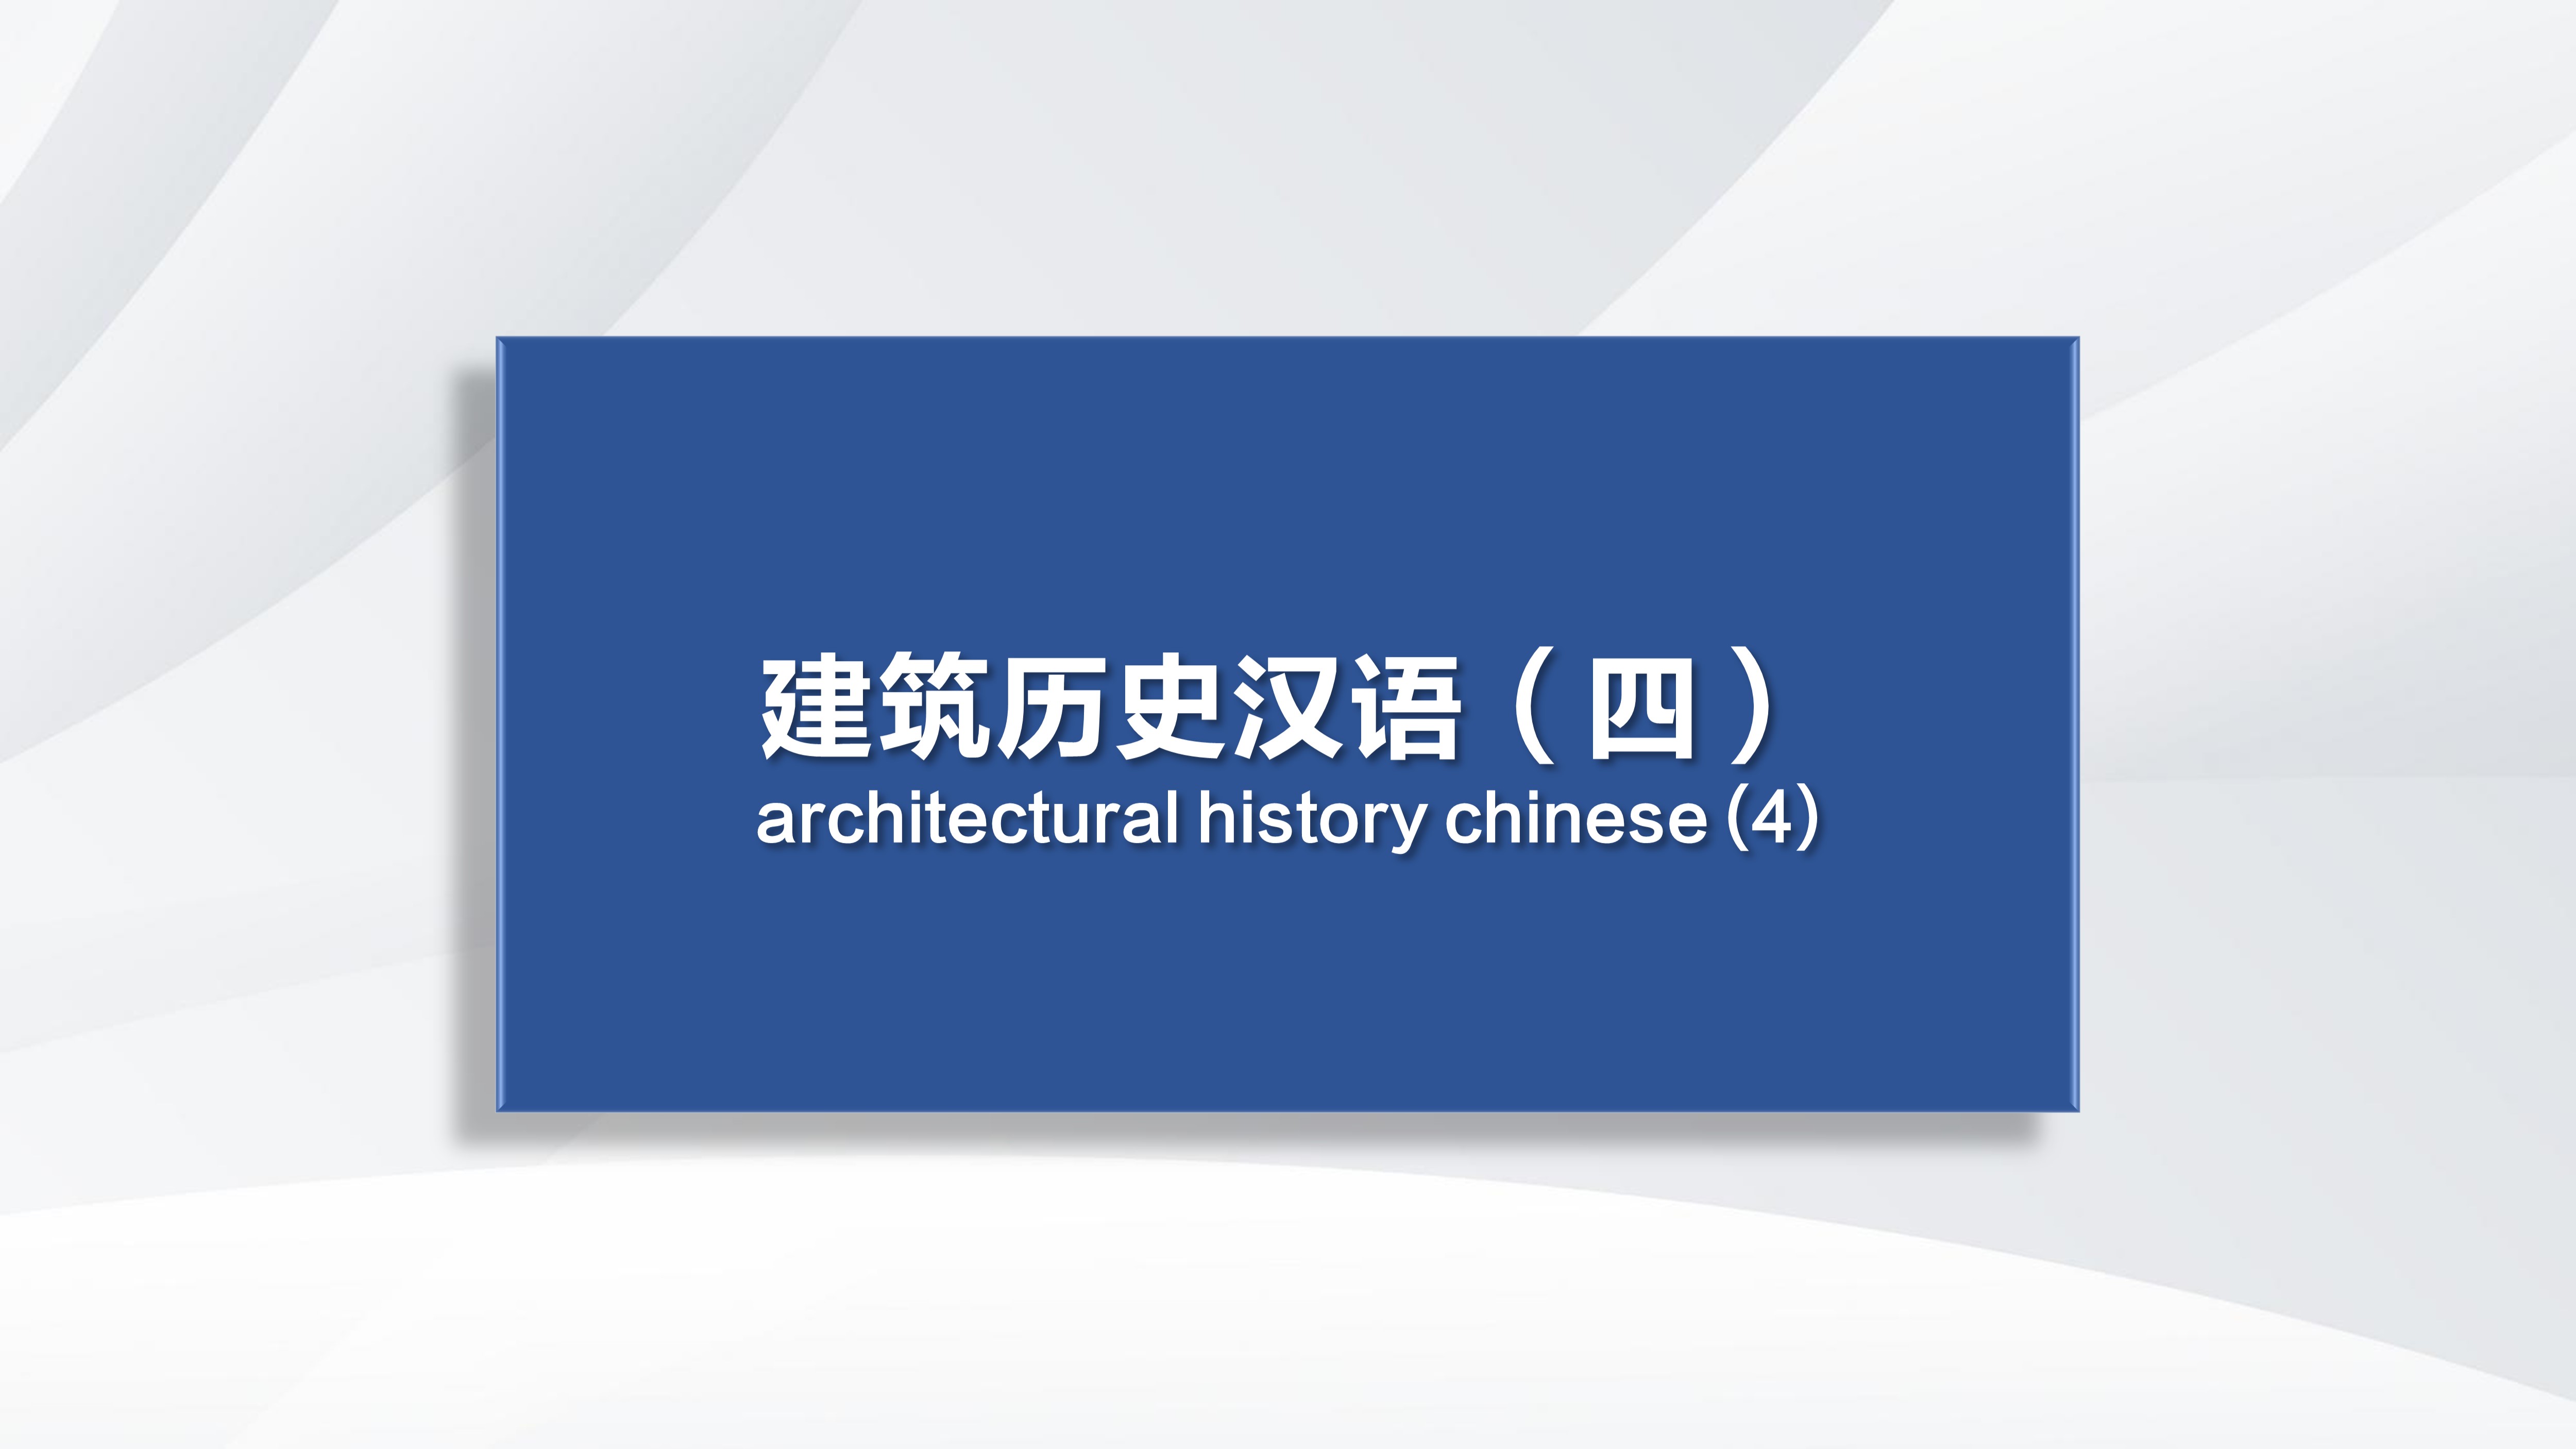 Architectural History Chinese (4)